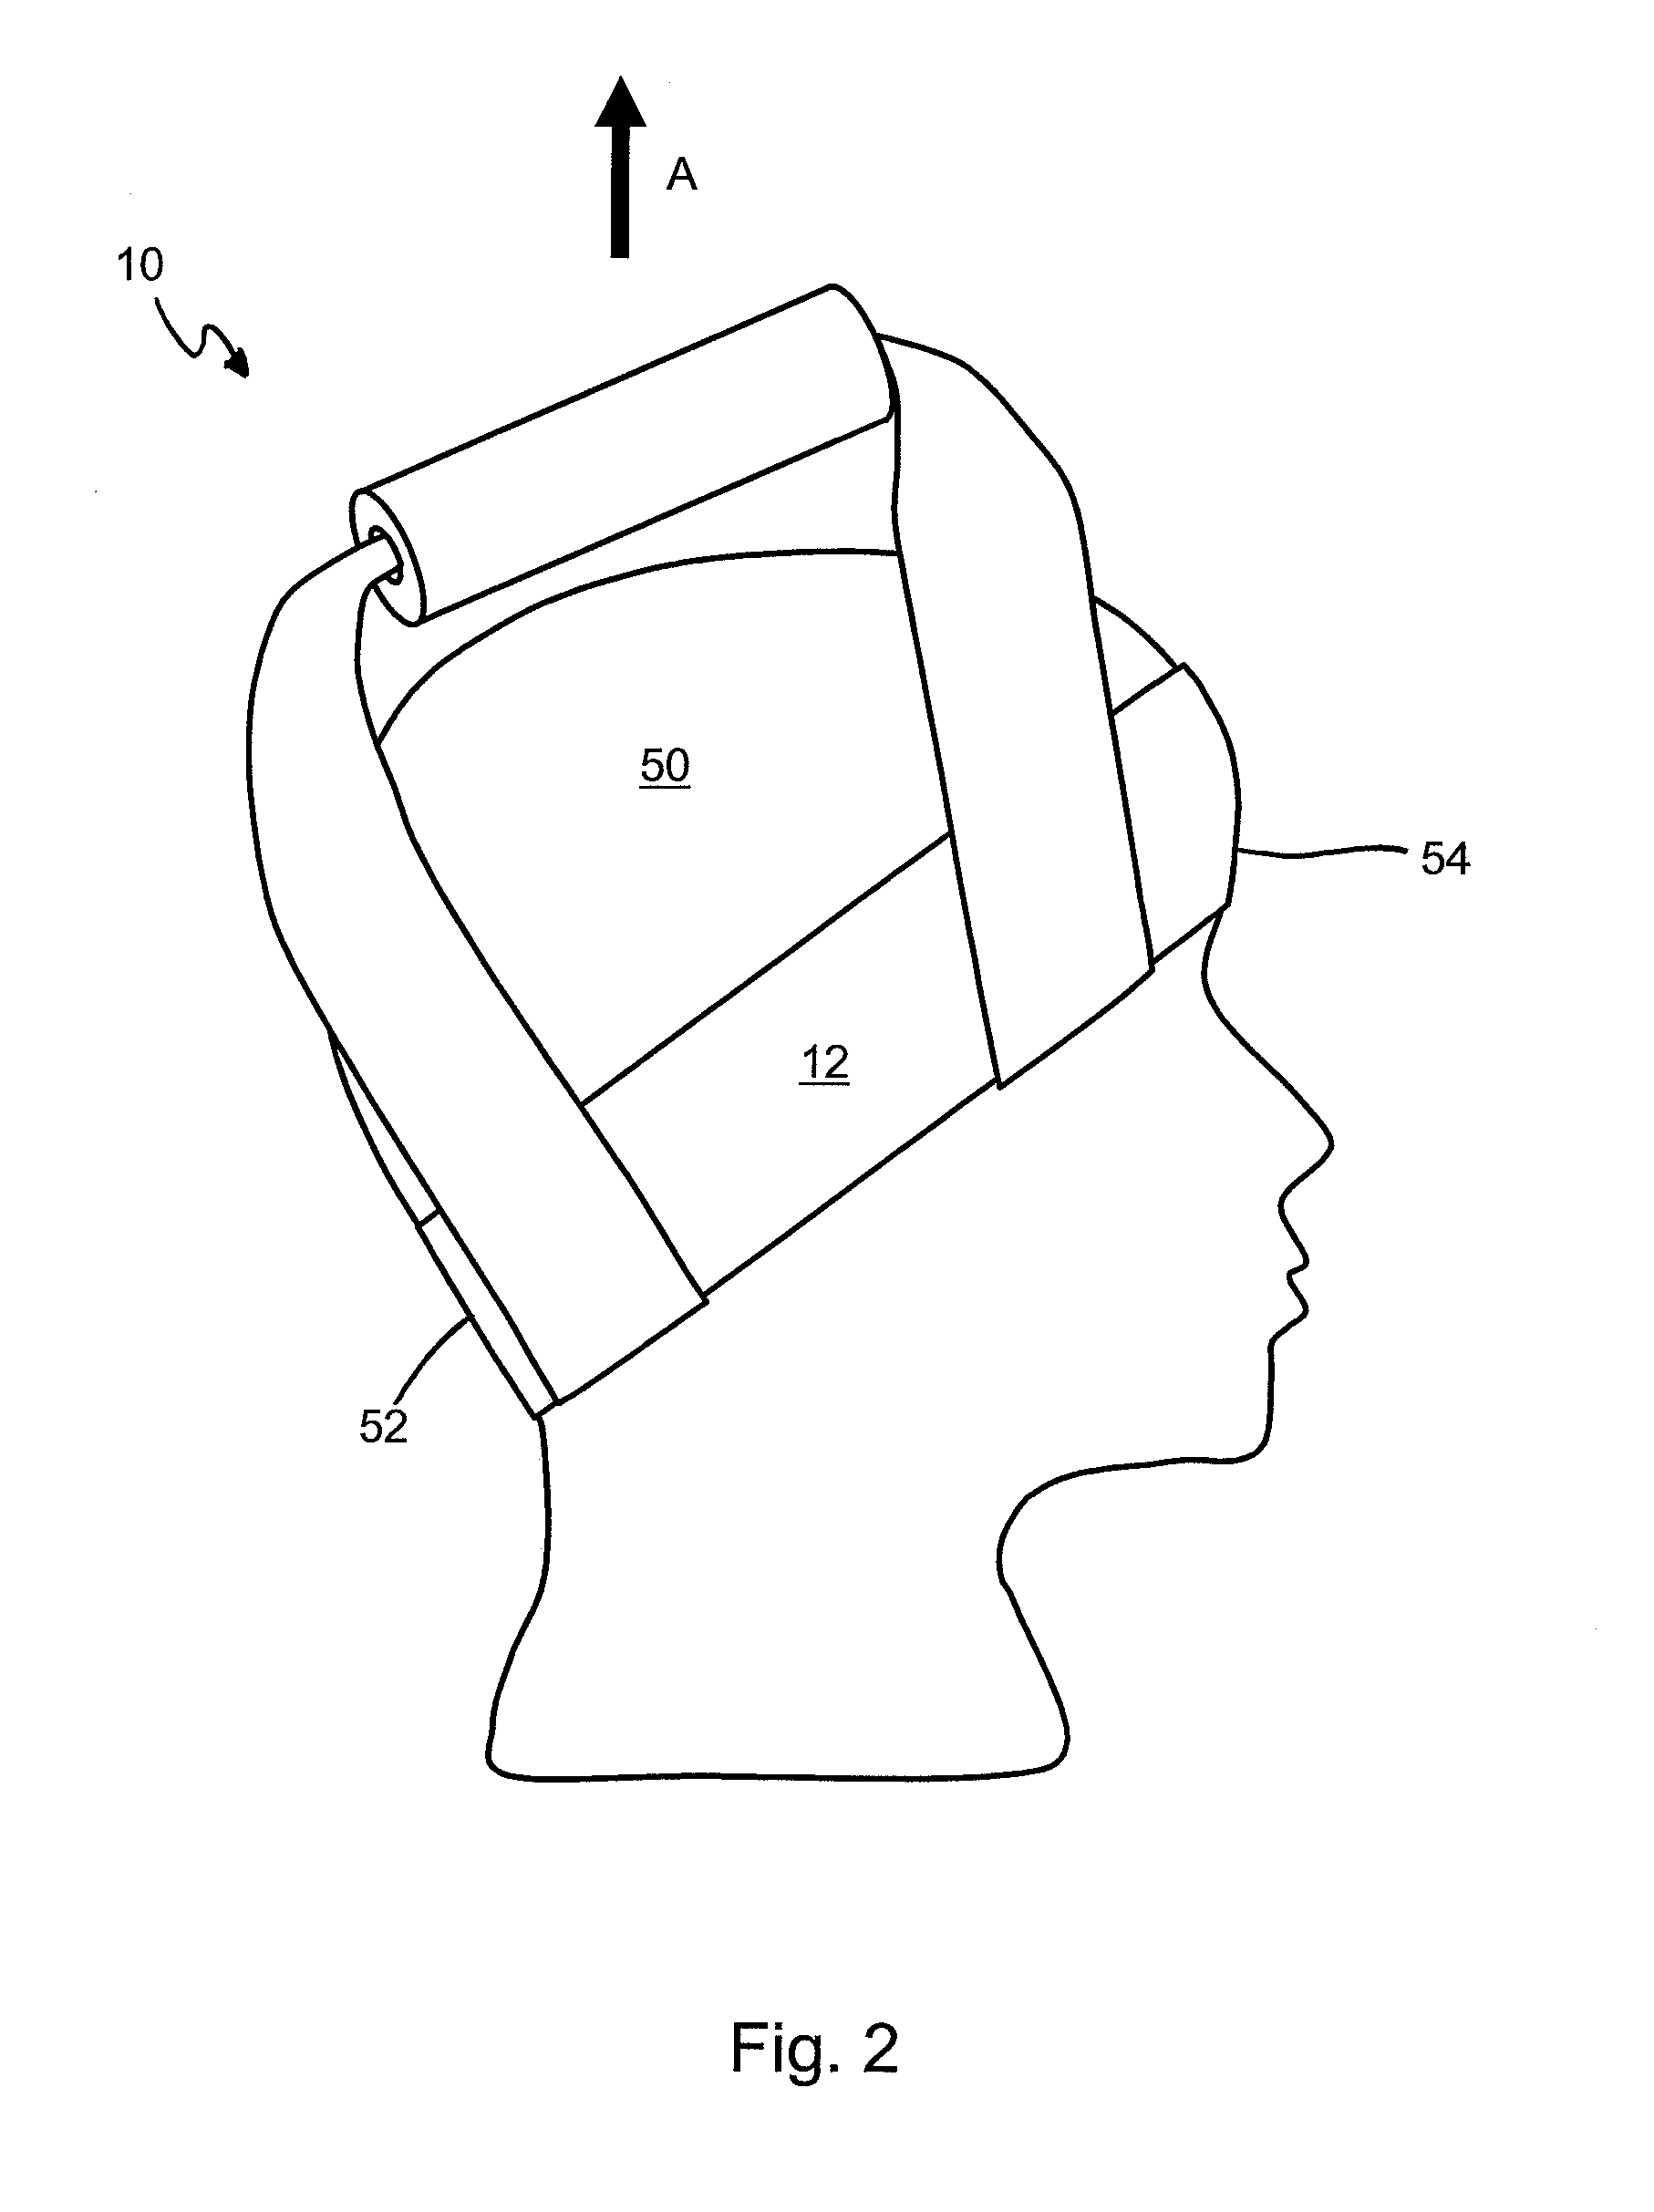 Manual Spinal Traction Device